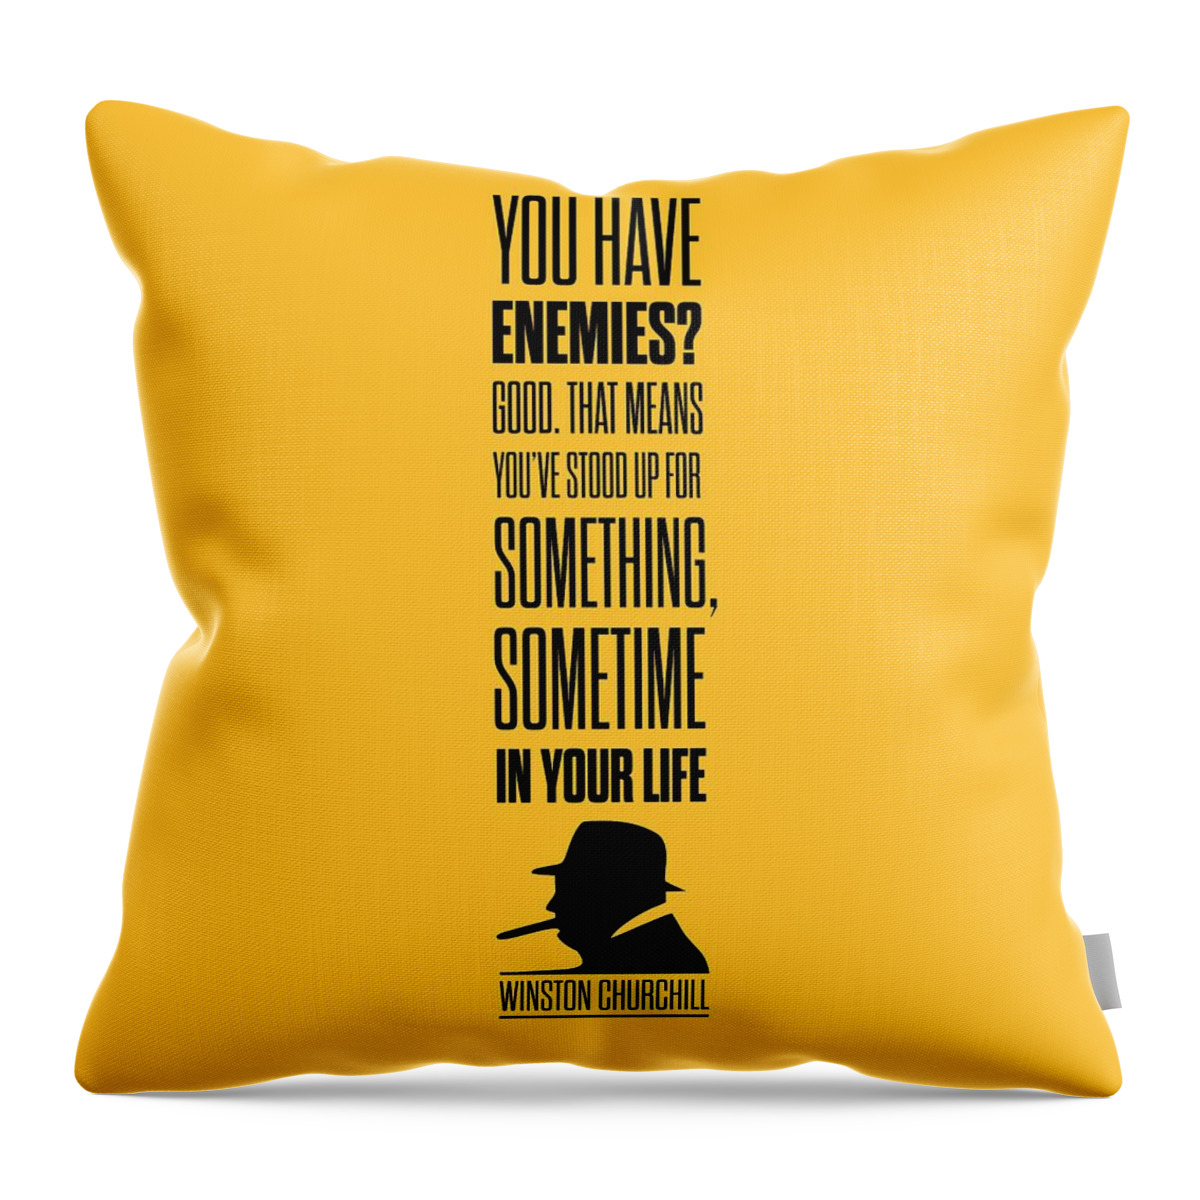 Winston Churchill Throw Pillow featuring the digital art Winston Churchill Inspirational Quotes Poster by Lab No 4 - The Quotography Department